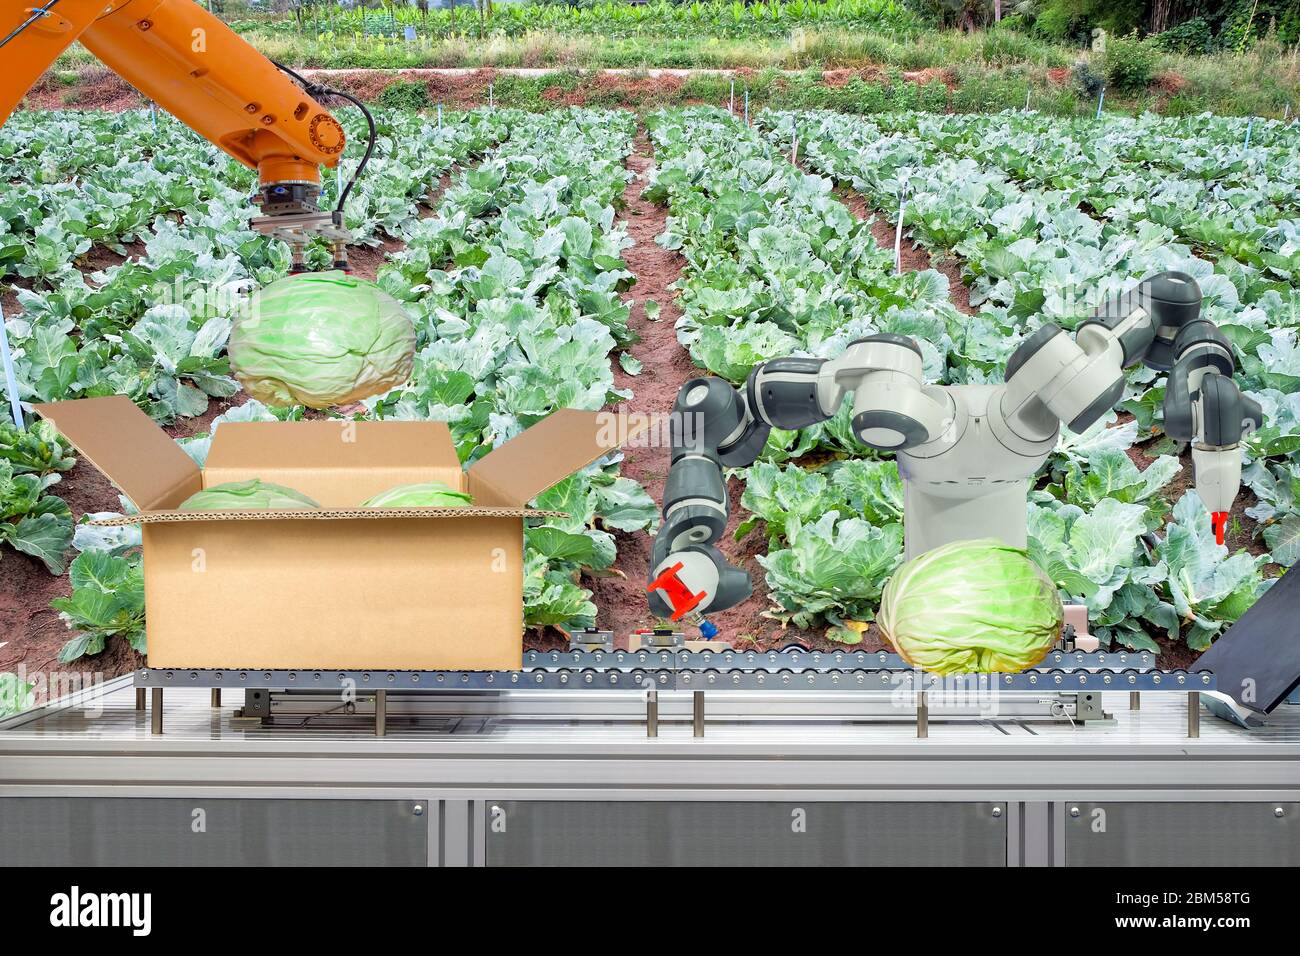 Industrial robot that were apply for agricultural to work packing the cabbage put on cardboard box via conveyor belt, industry 4.0 and smart farm 4.0 Stock Photo